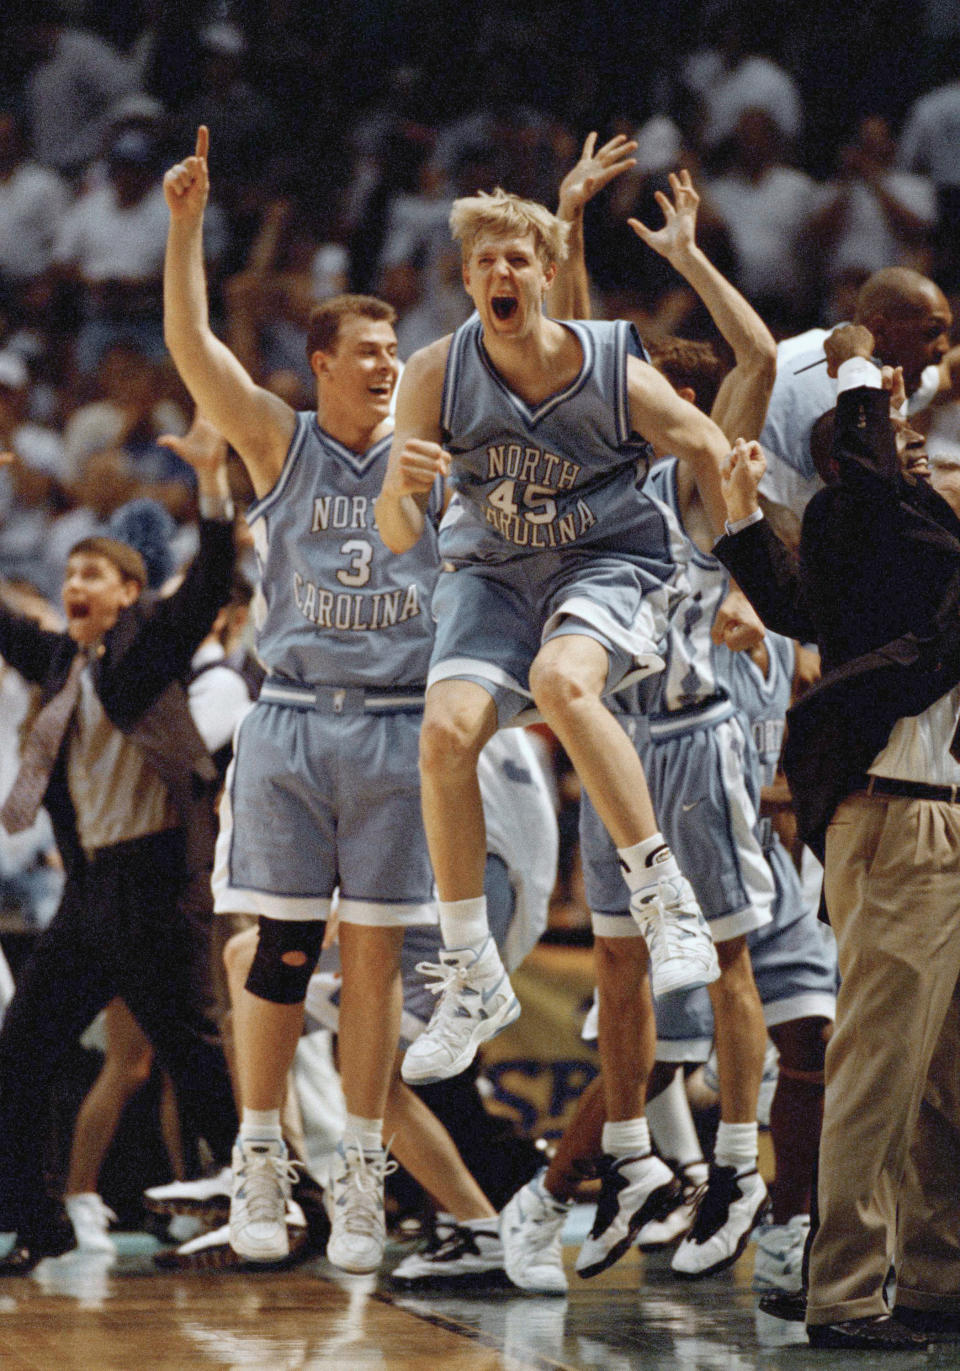 FILE - North Carolina's Serge Zeikker (45) goes airborne as the Tar Heels beat Kentucky 74-61 in NCAA Southeast Regional Championship, March 25, 1995, at the Birmingham-Jefferson Civic Center in Birmingham, Alabama. The victory put the Tar Heels in the Final Four. (AP Photo/Bob Jordan, File)